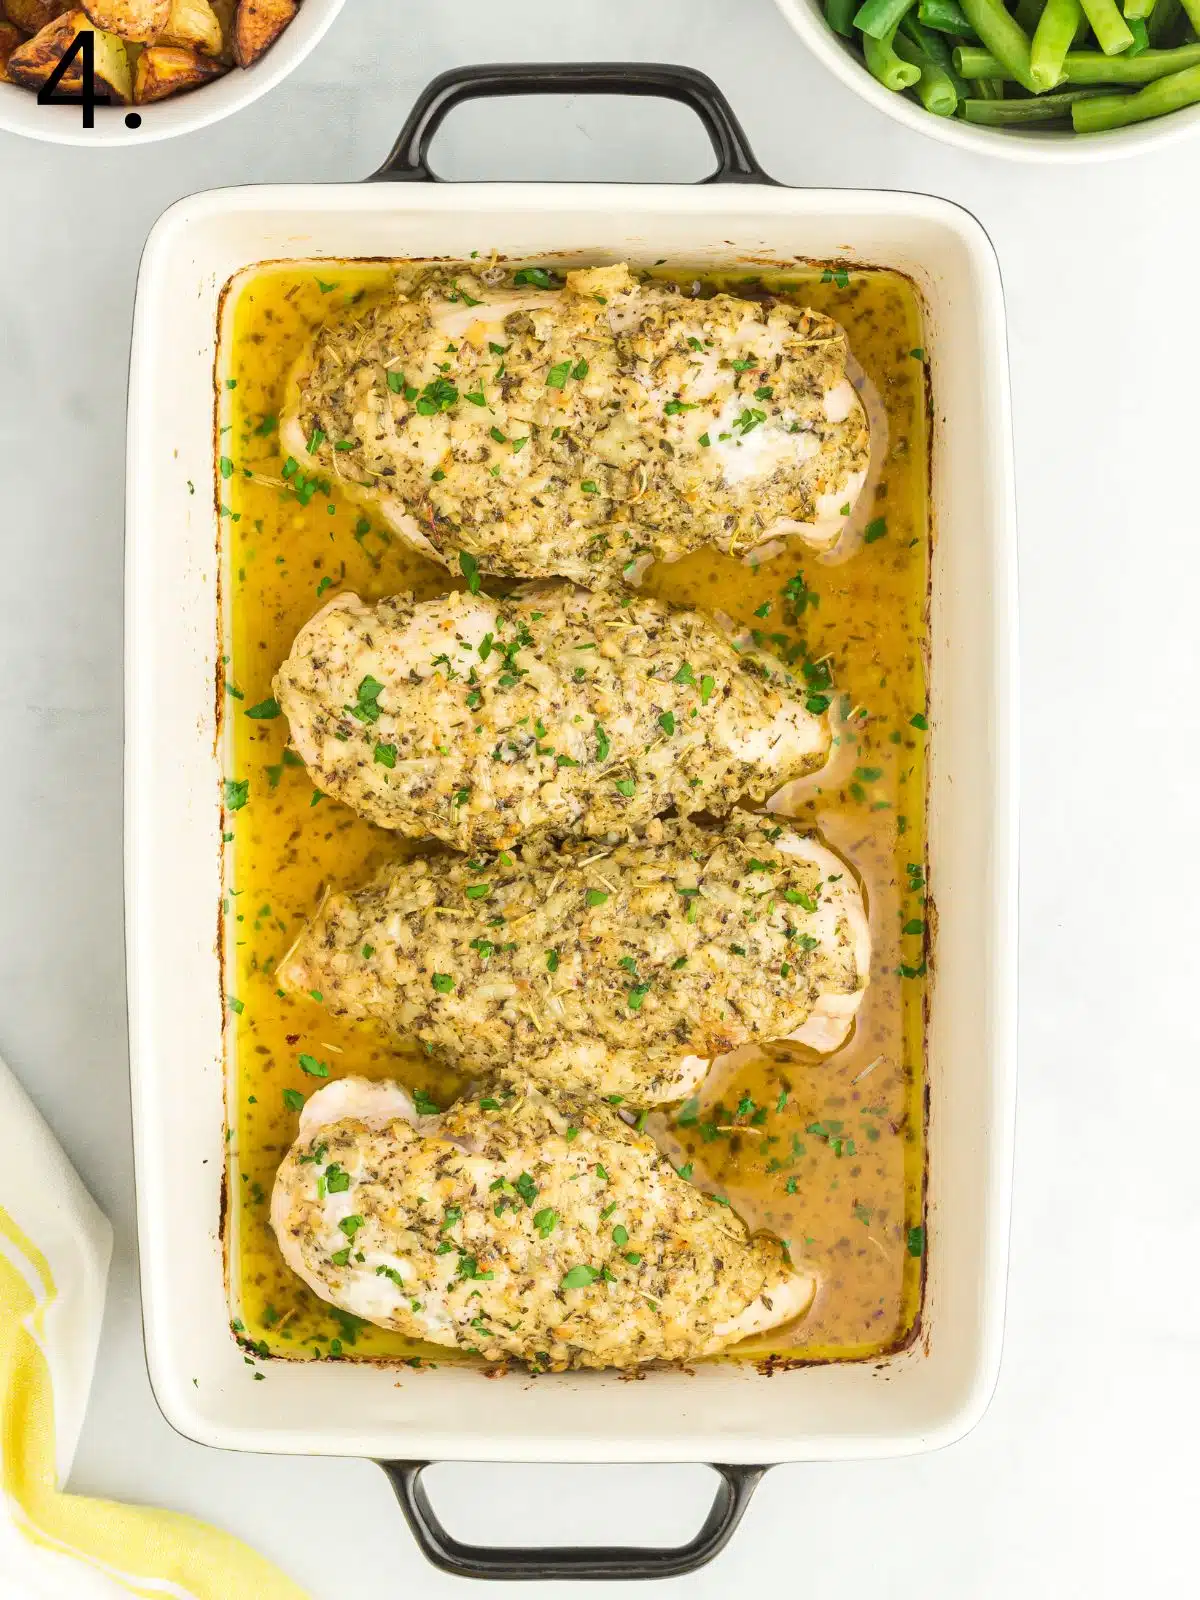 baked chicken in casserole dish with garlic butter and herbs.